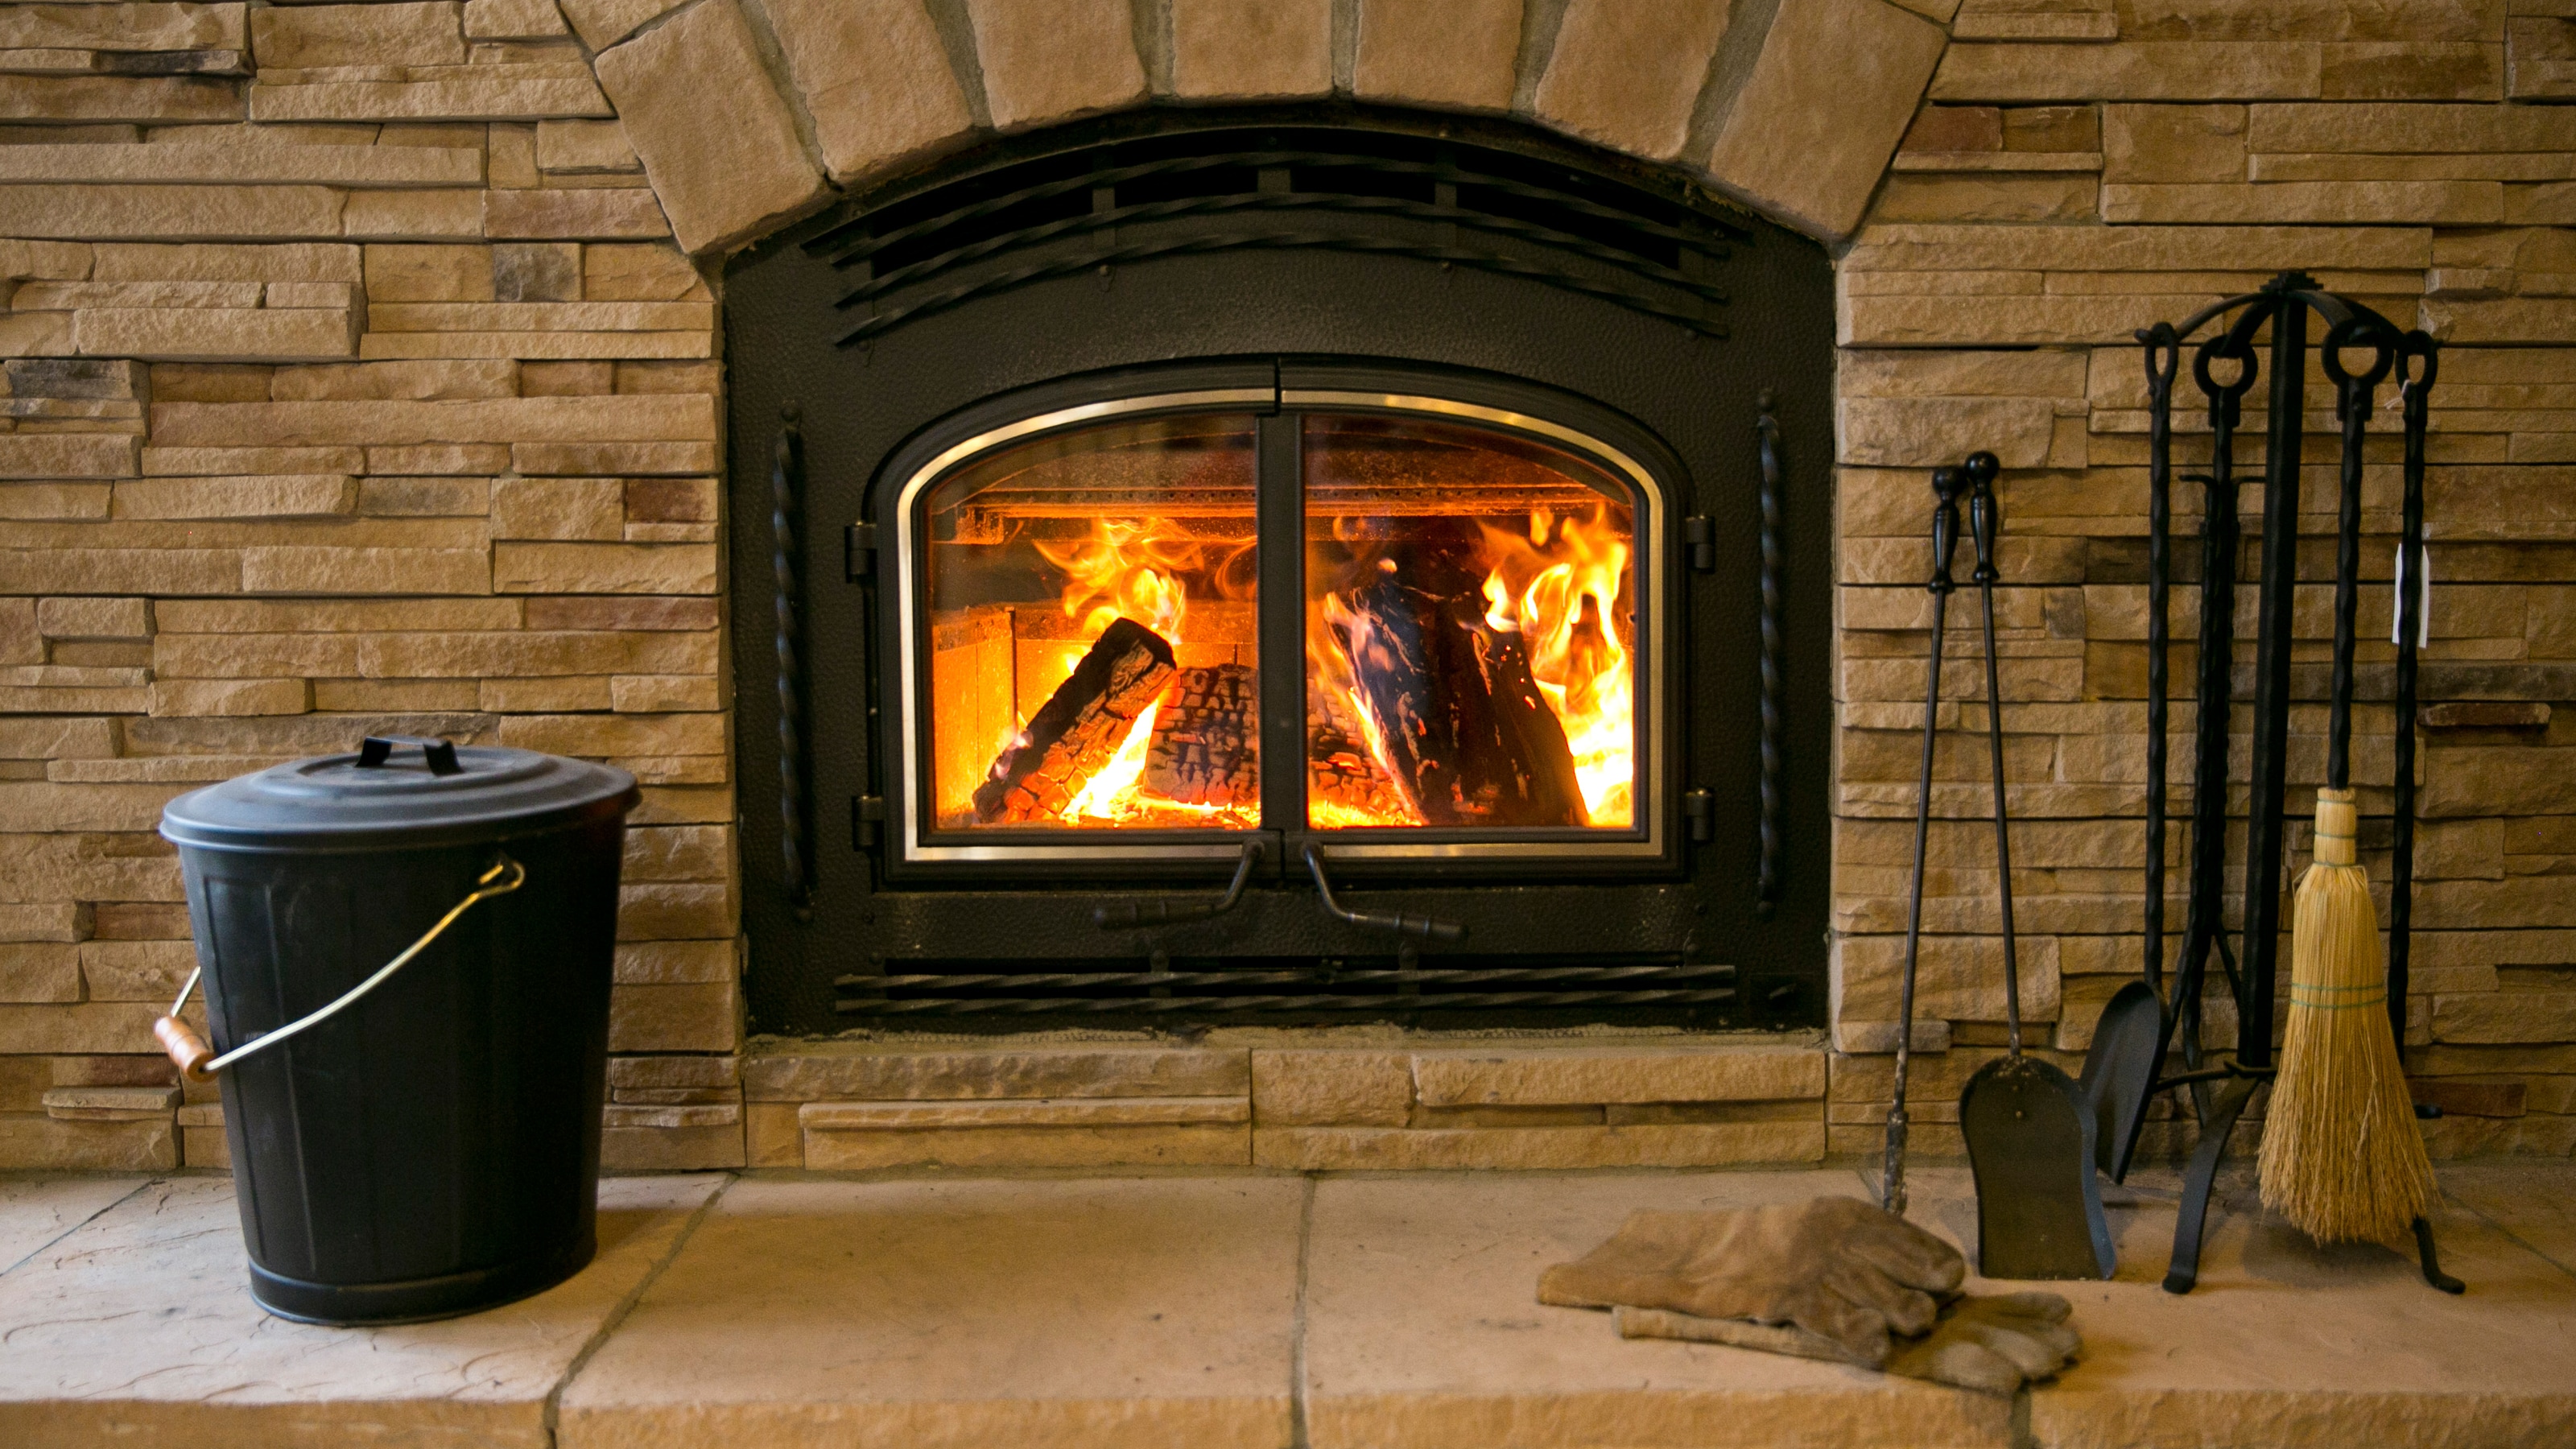 Gas Fireplace Glass Cleaner New How to Convert A Gas Fireplace to Wood Burning